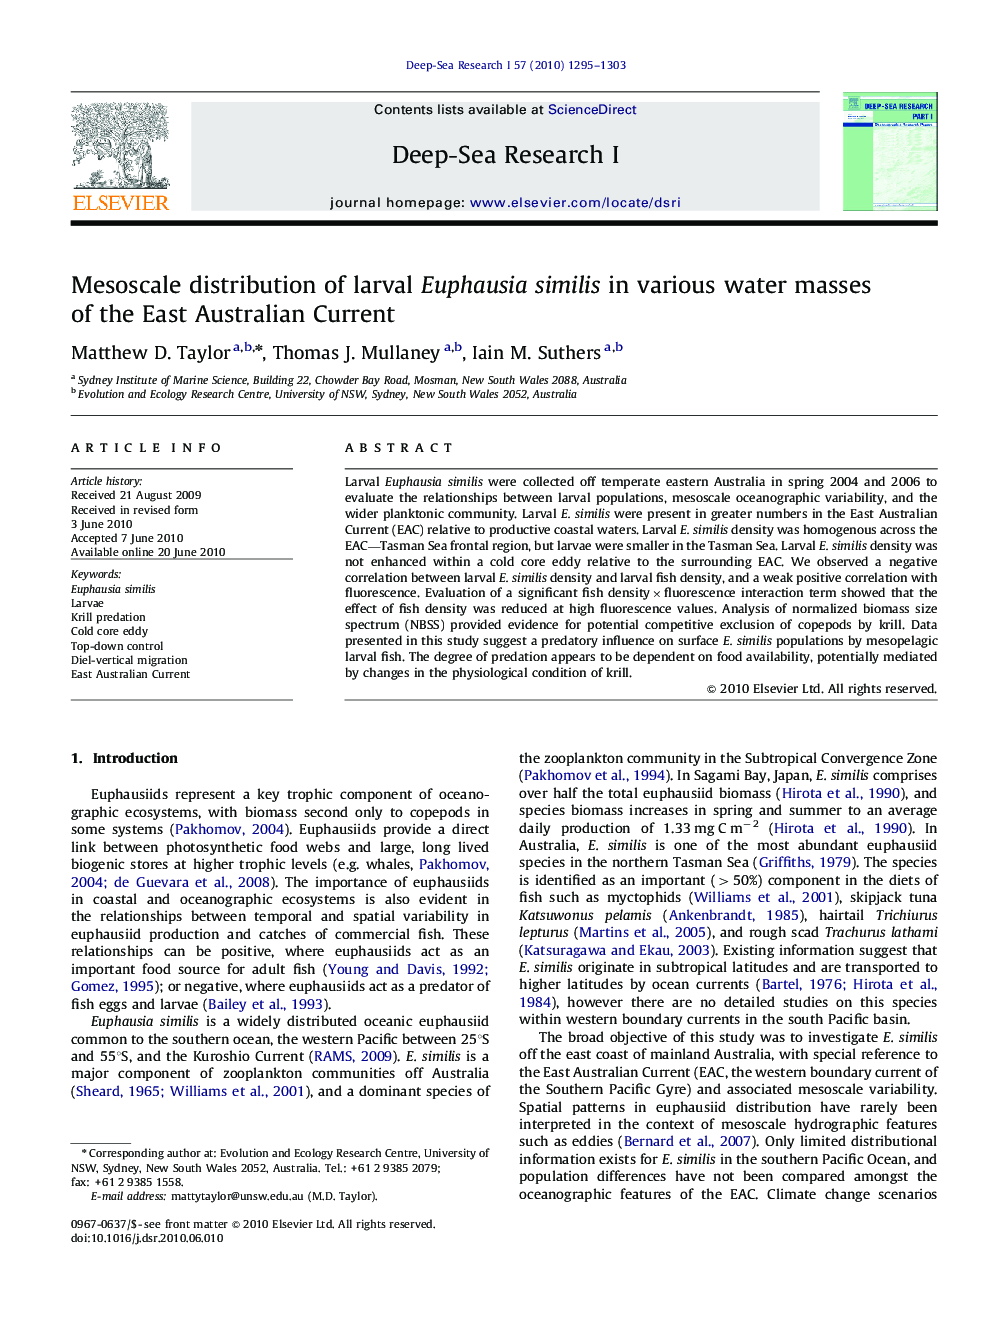 Mesoscale distribution of larval Euphausia similis in various water masses of the East Australian Current